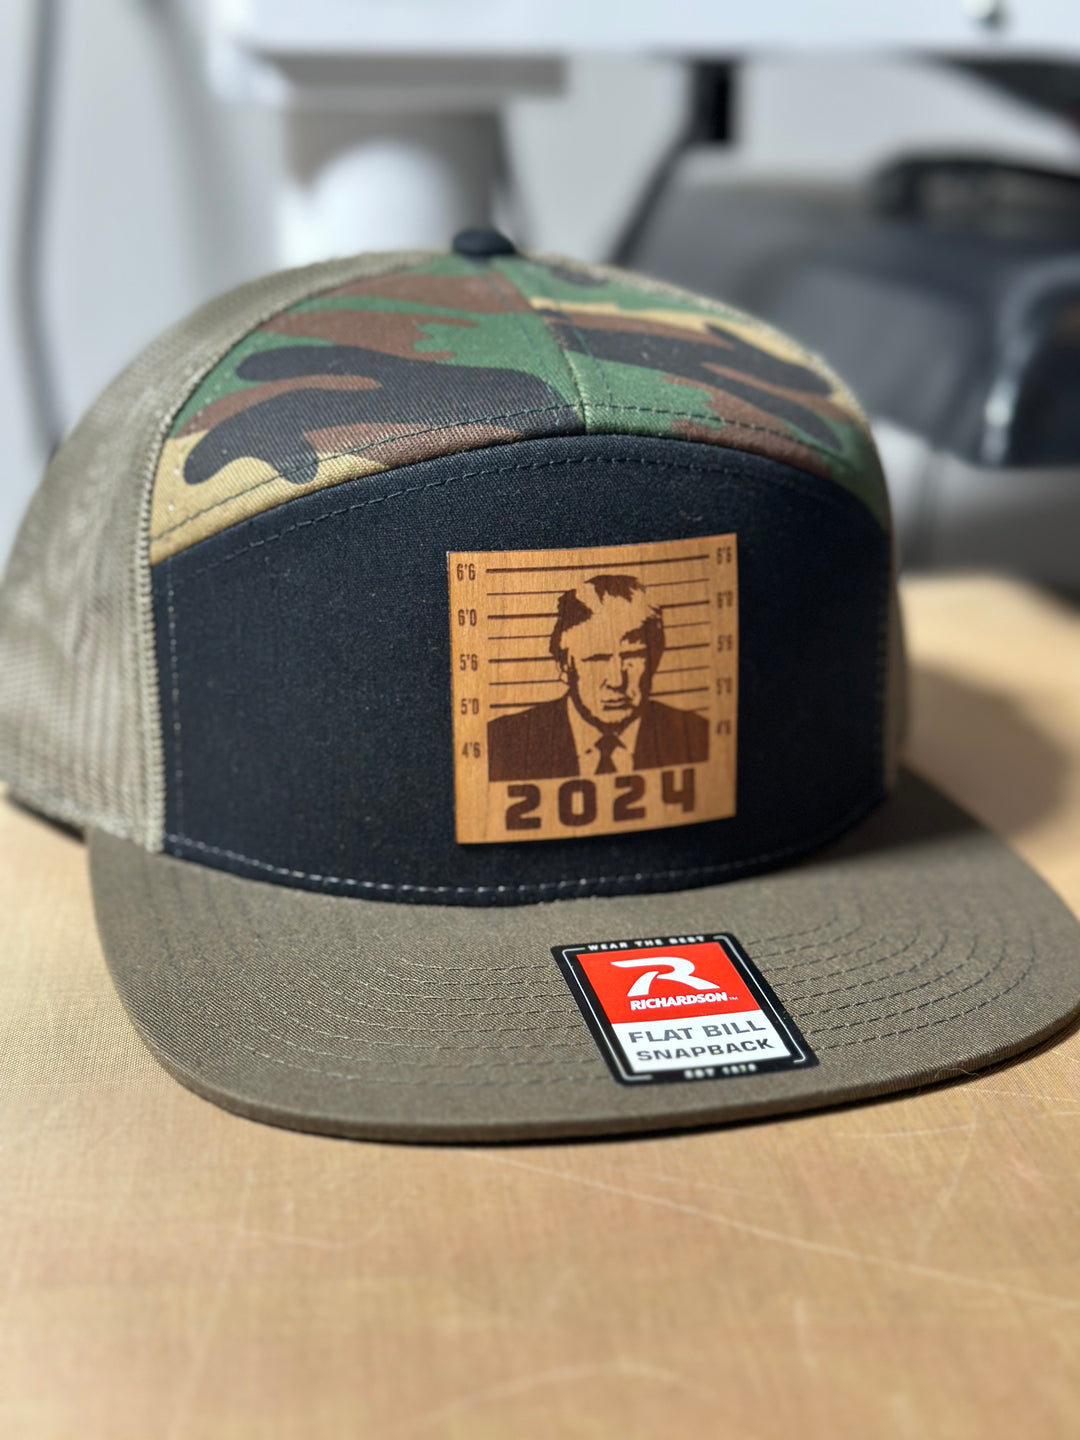 The Mugshot Wooden Patch Hat